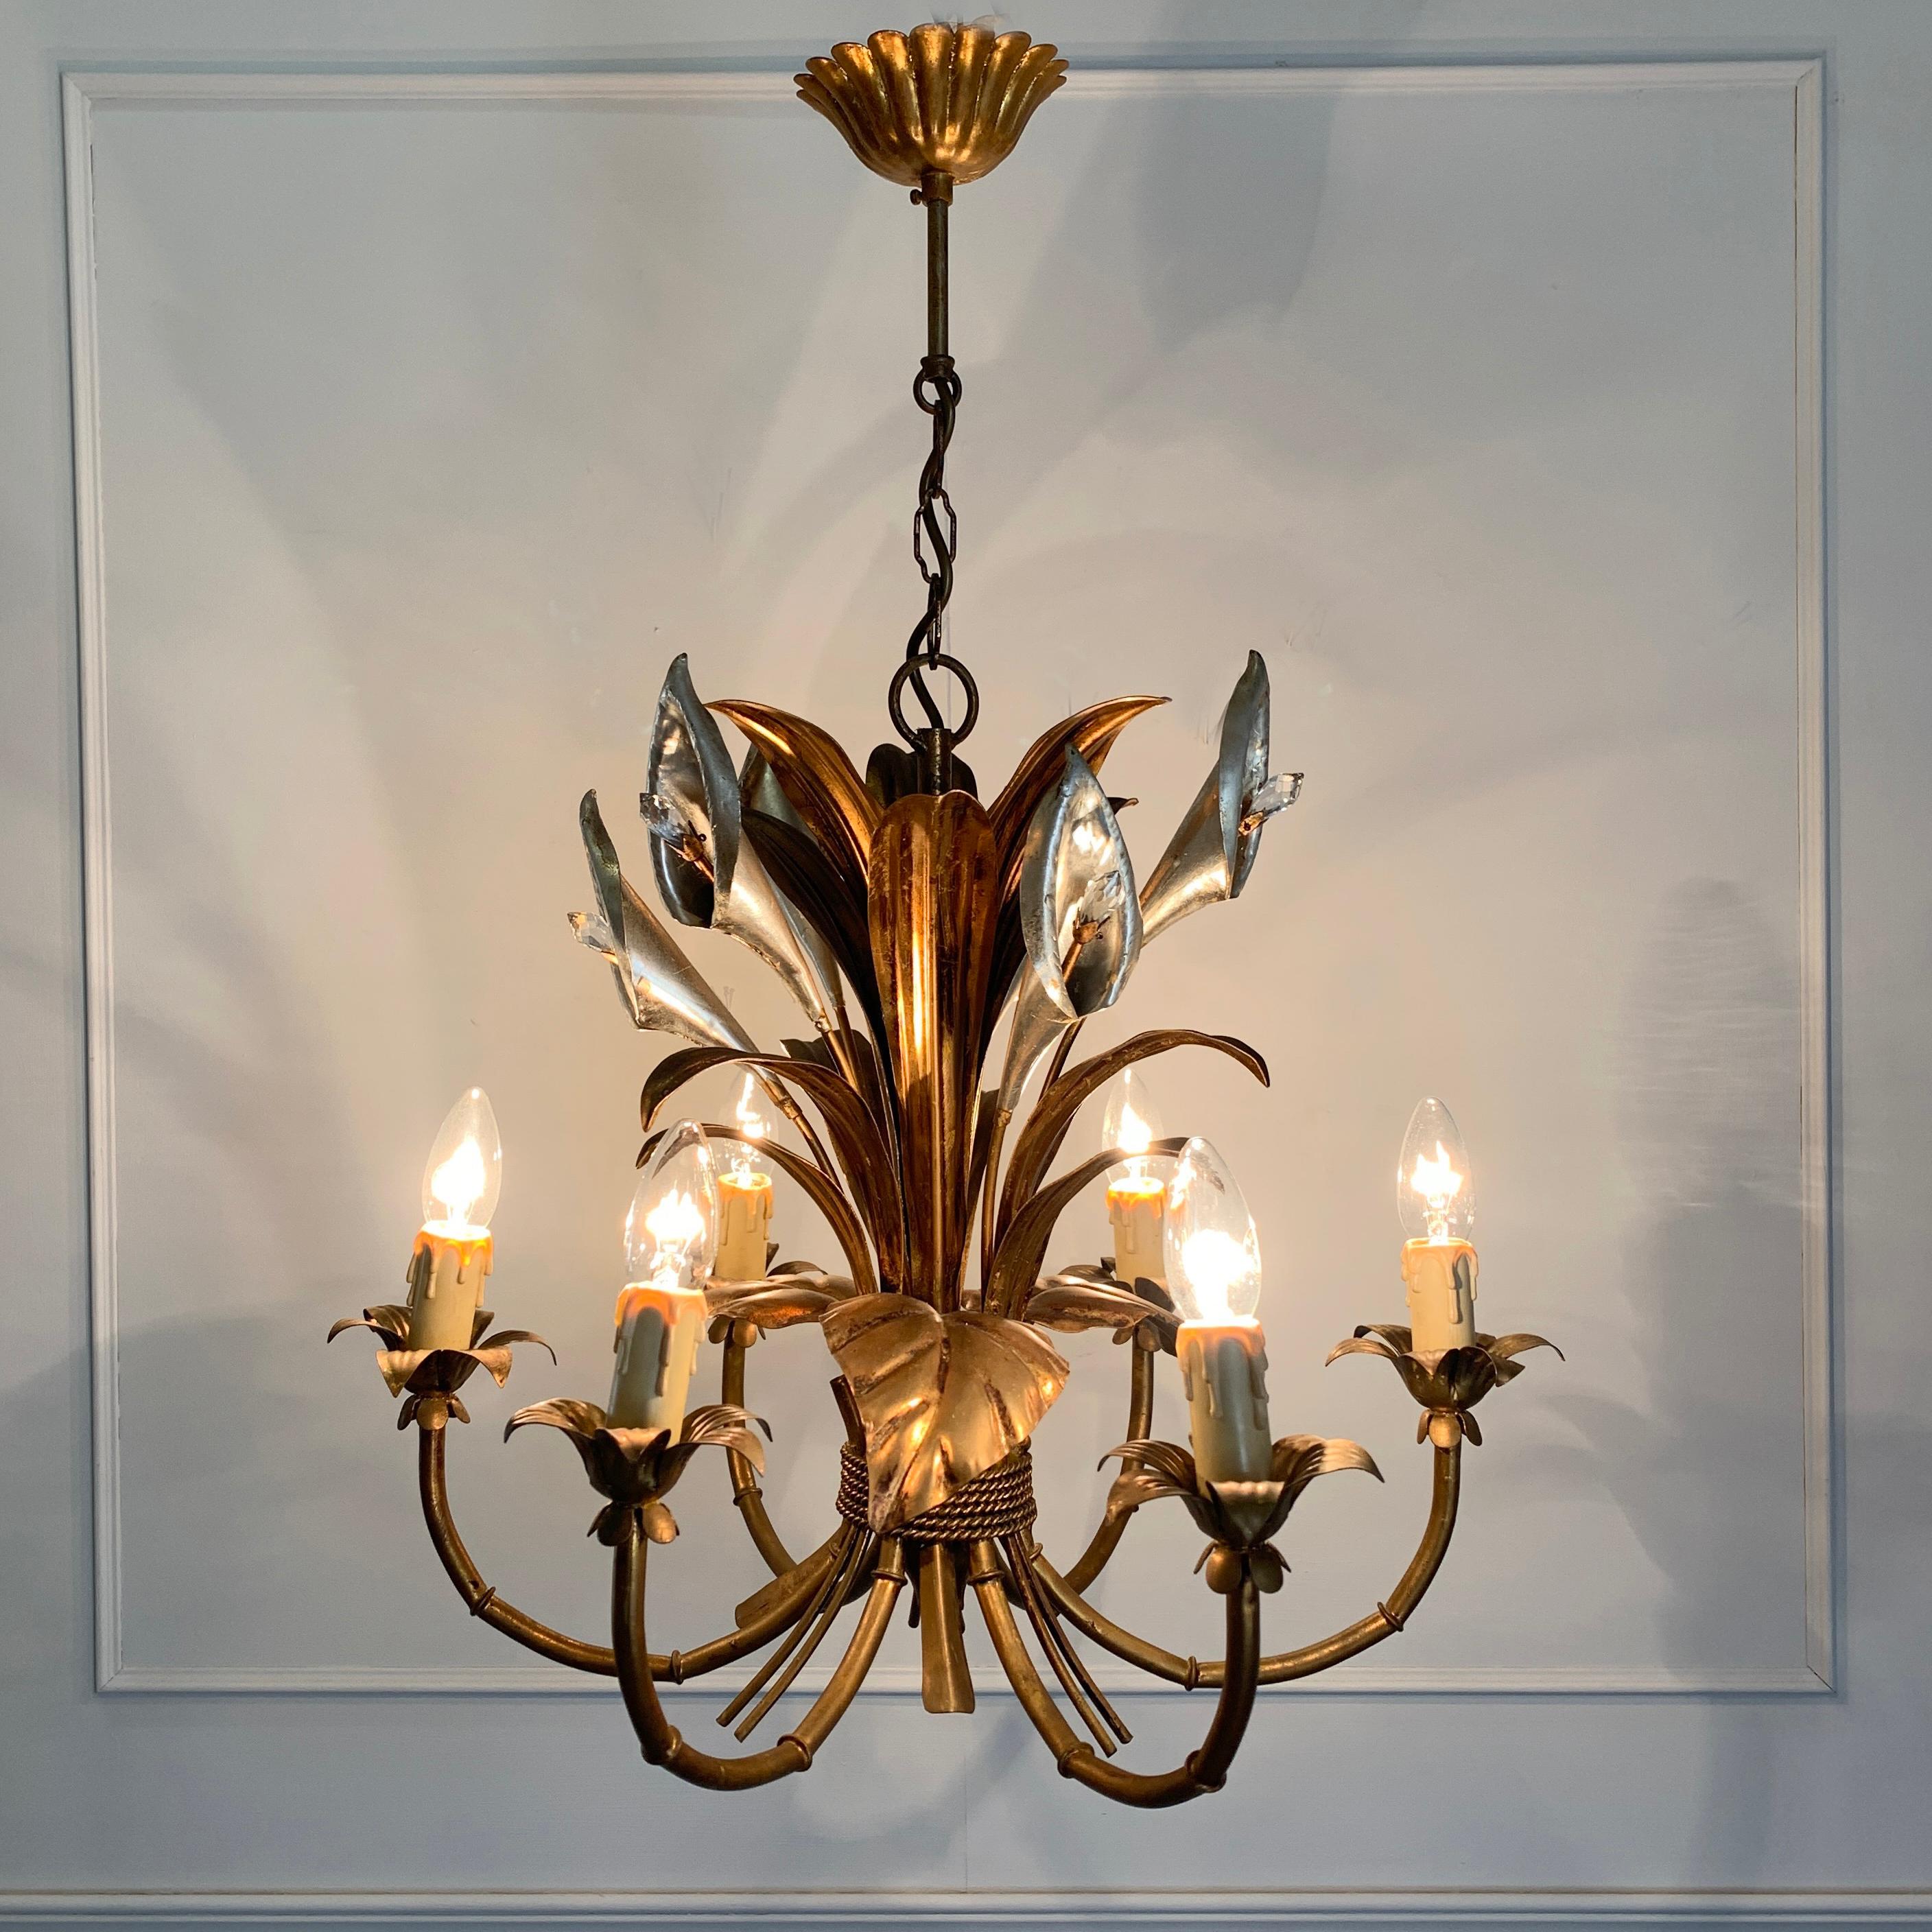 Hans Kögl calla lily chandelier, circa 1970s
Stunning silver and gilt calla lily flower design
Each silver calla lily has a central faceted Swarovski crystal stamen

There are 6 bulb holders with faux candle covers
Large and slim calla leaves are